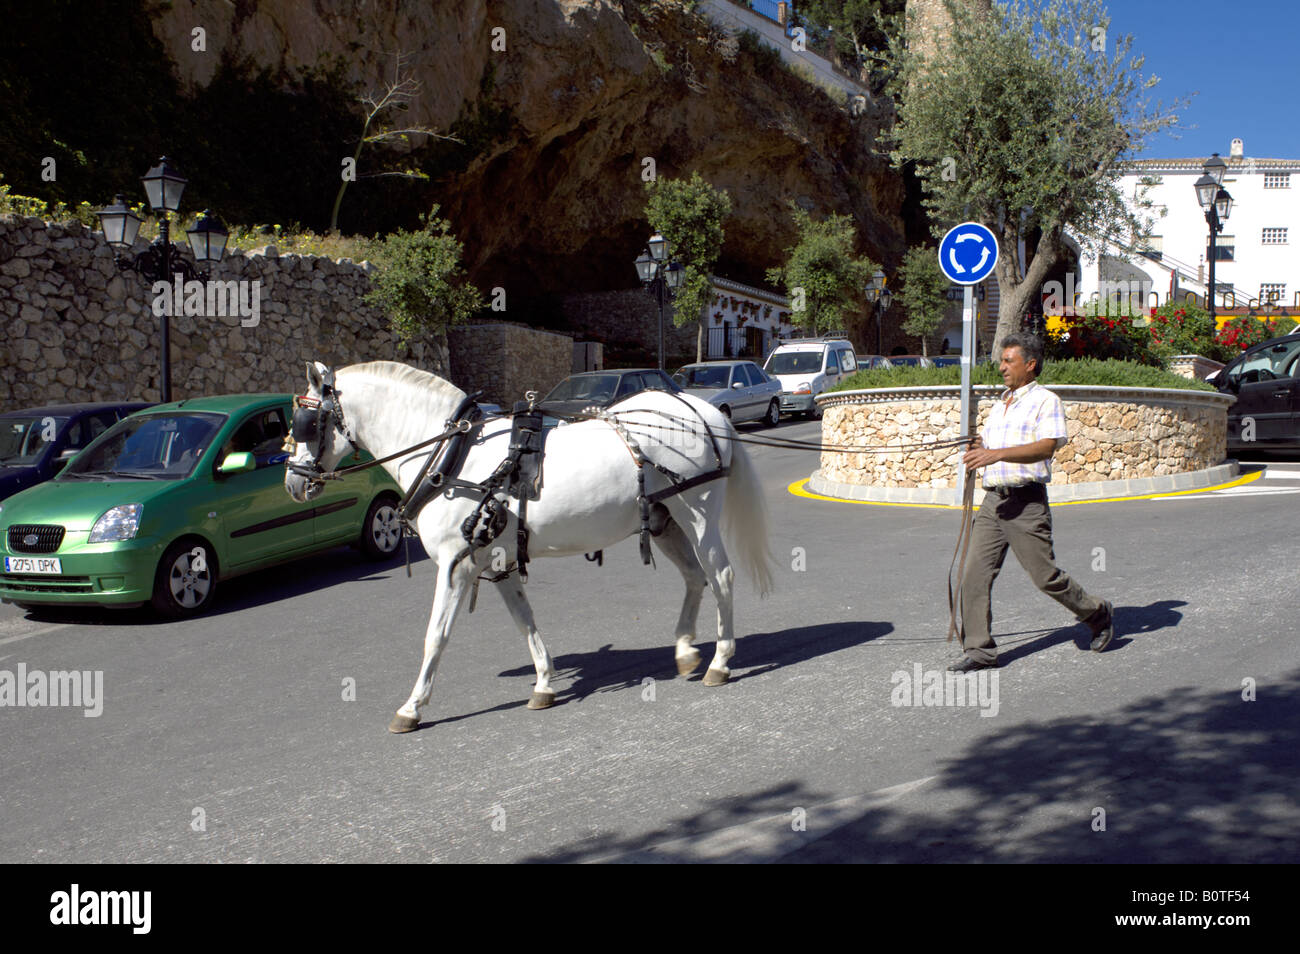 Man walking a white horse on reigns through the streets of Mijas Pueblo, Costa del Sol, Andalucia, Spain Stock Photo